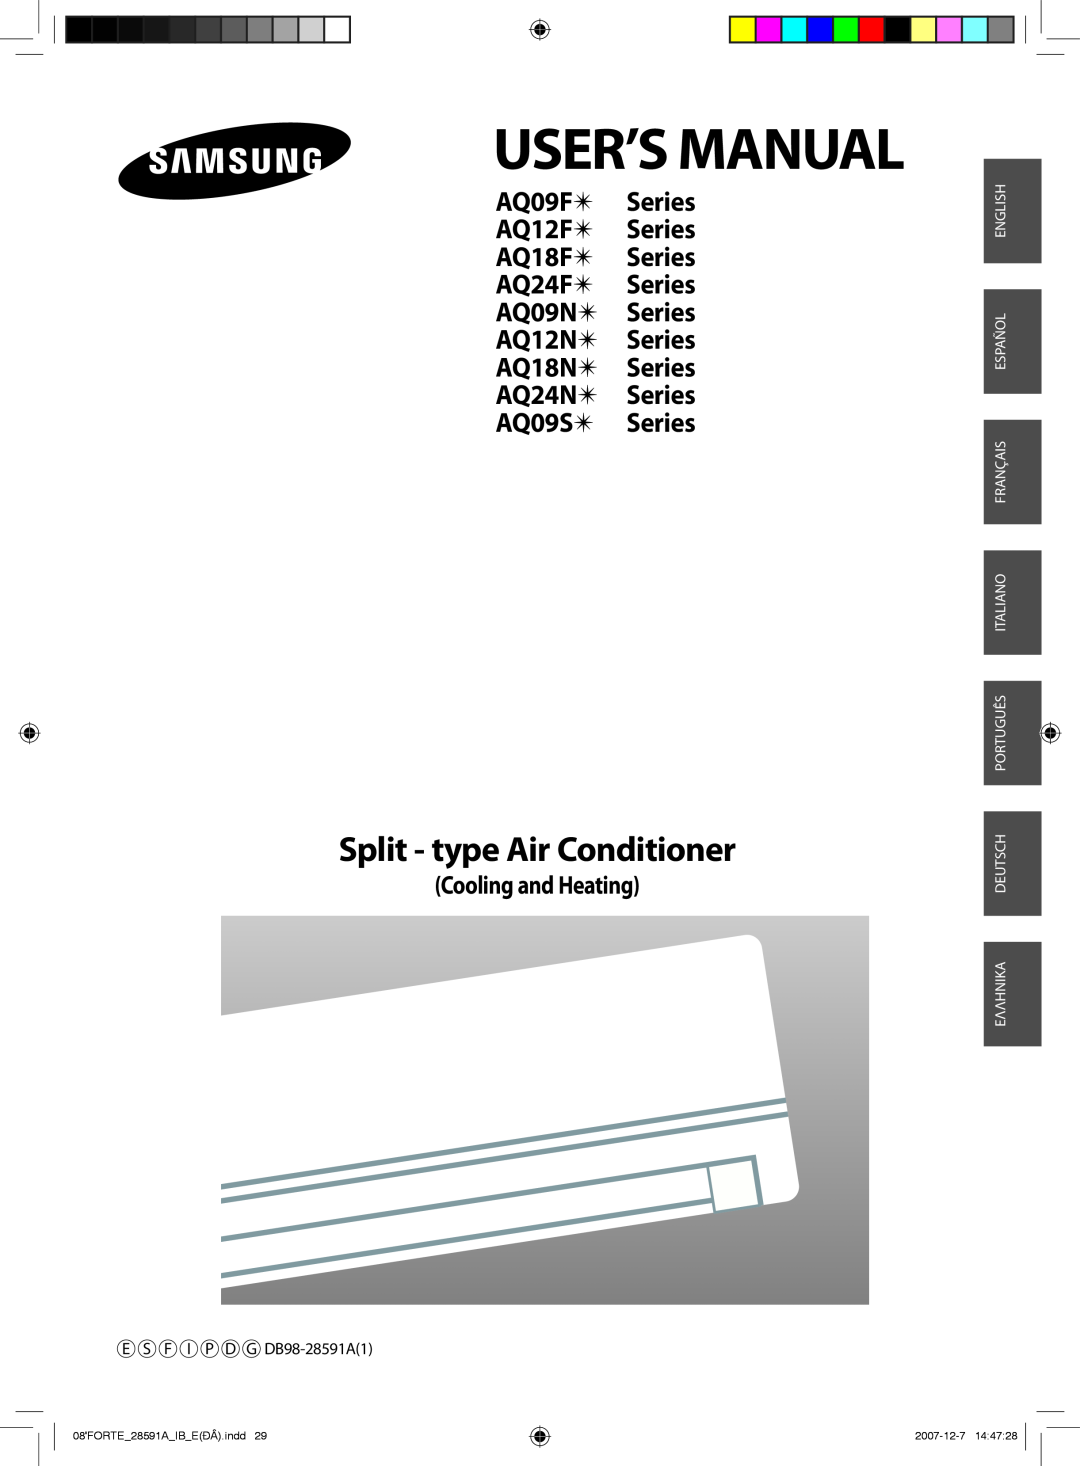 Samsung AQ24FCN manual User’S Manual, Split - type Air Conditioner, Cooling and Heating, E S F I P D G DB98-28591A1 